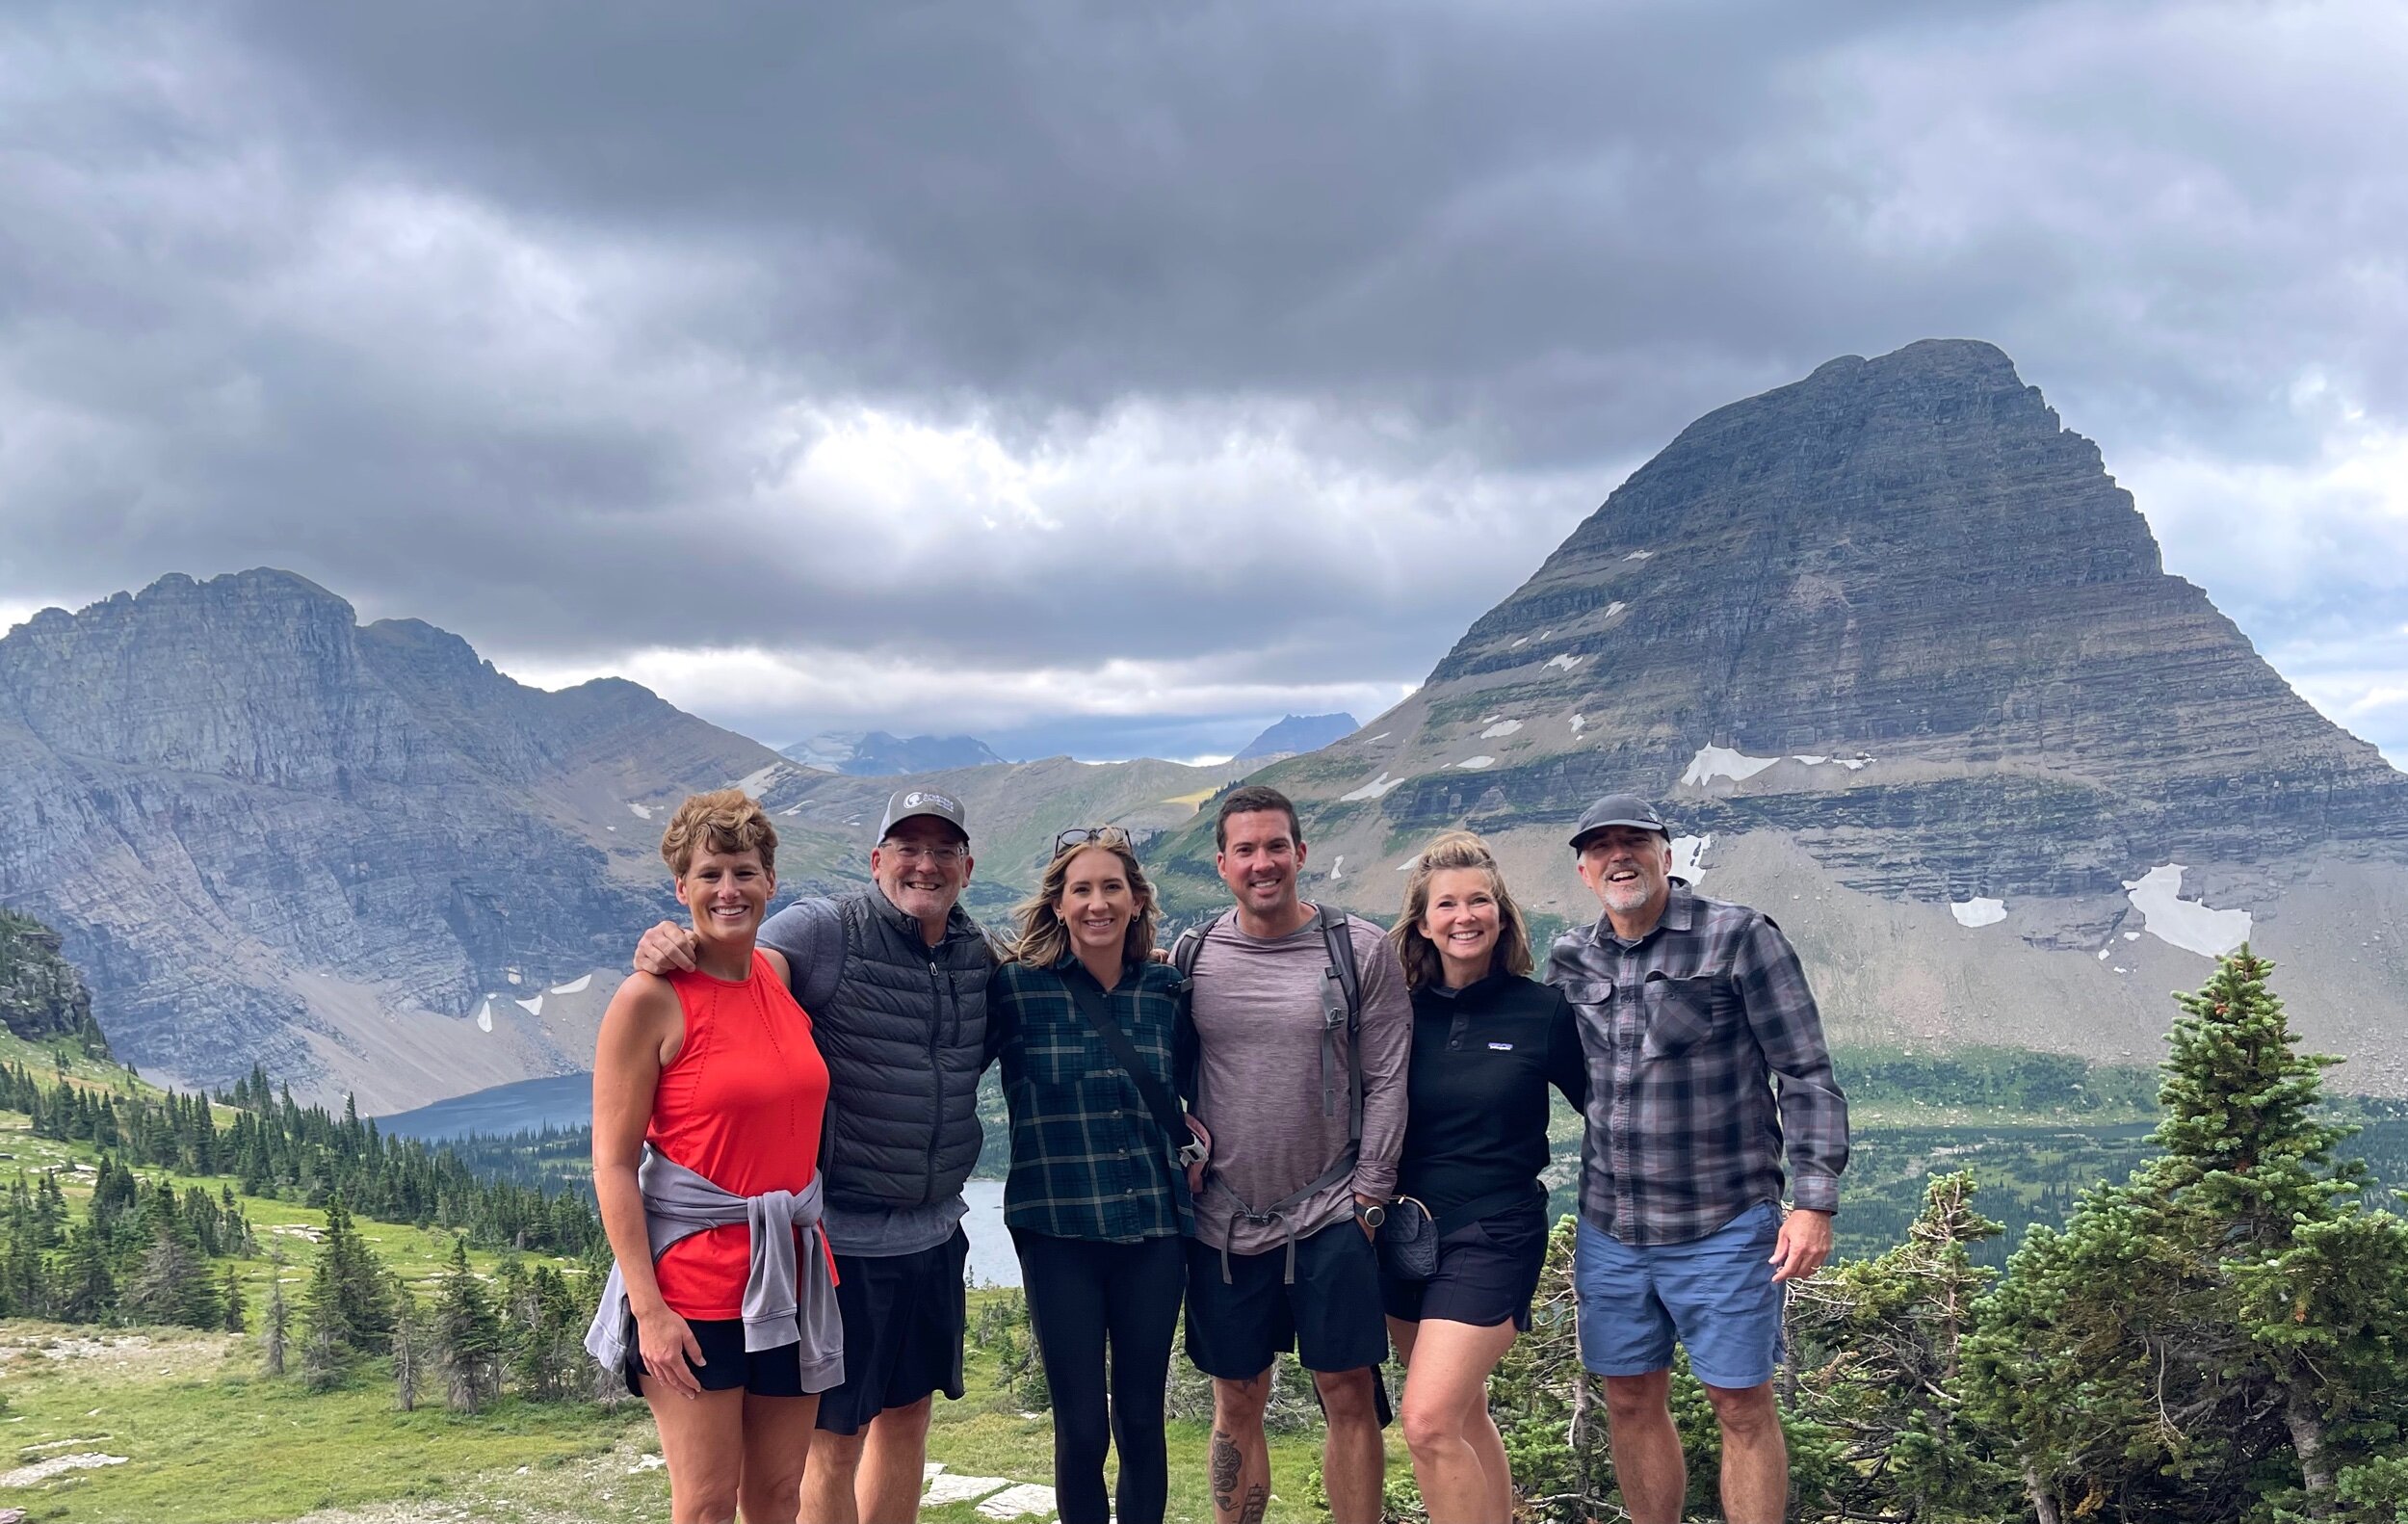  Craig’s brother, and our sister-in-law,  Keith and Tiffany, also came to enjoy  Glacier National Park  with us. Two days of their visit overlapped with Kevin and Rachel’s. It was truly a special time together.  We had so much fun. 🧡🧡 